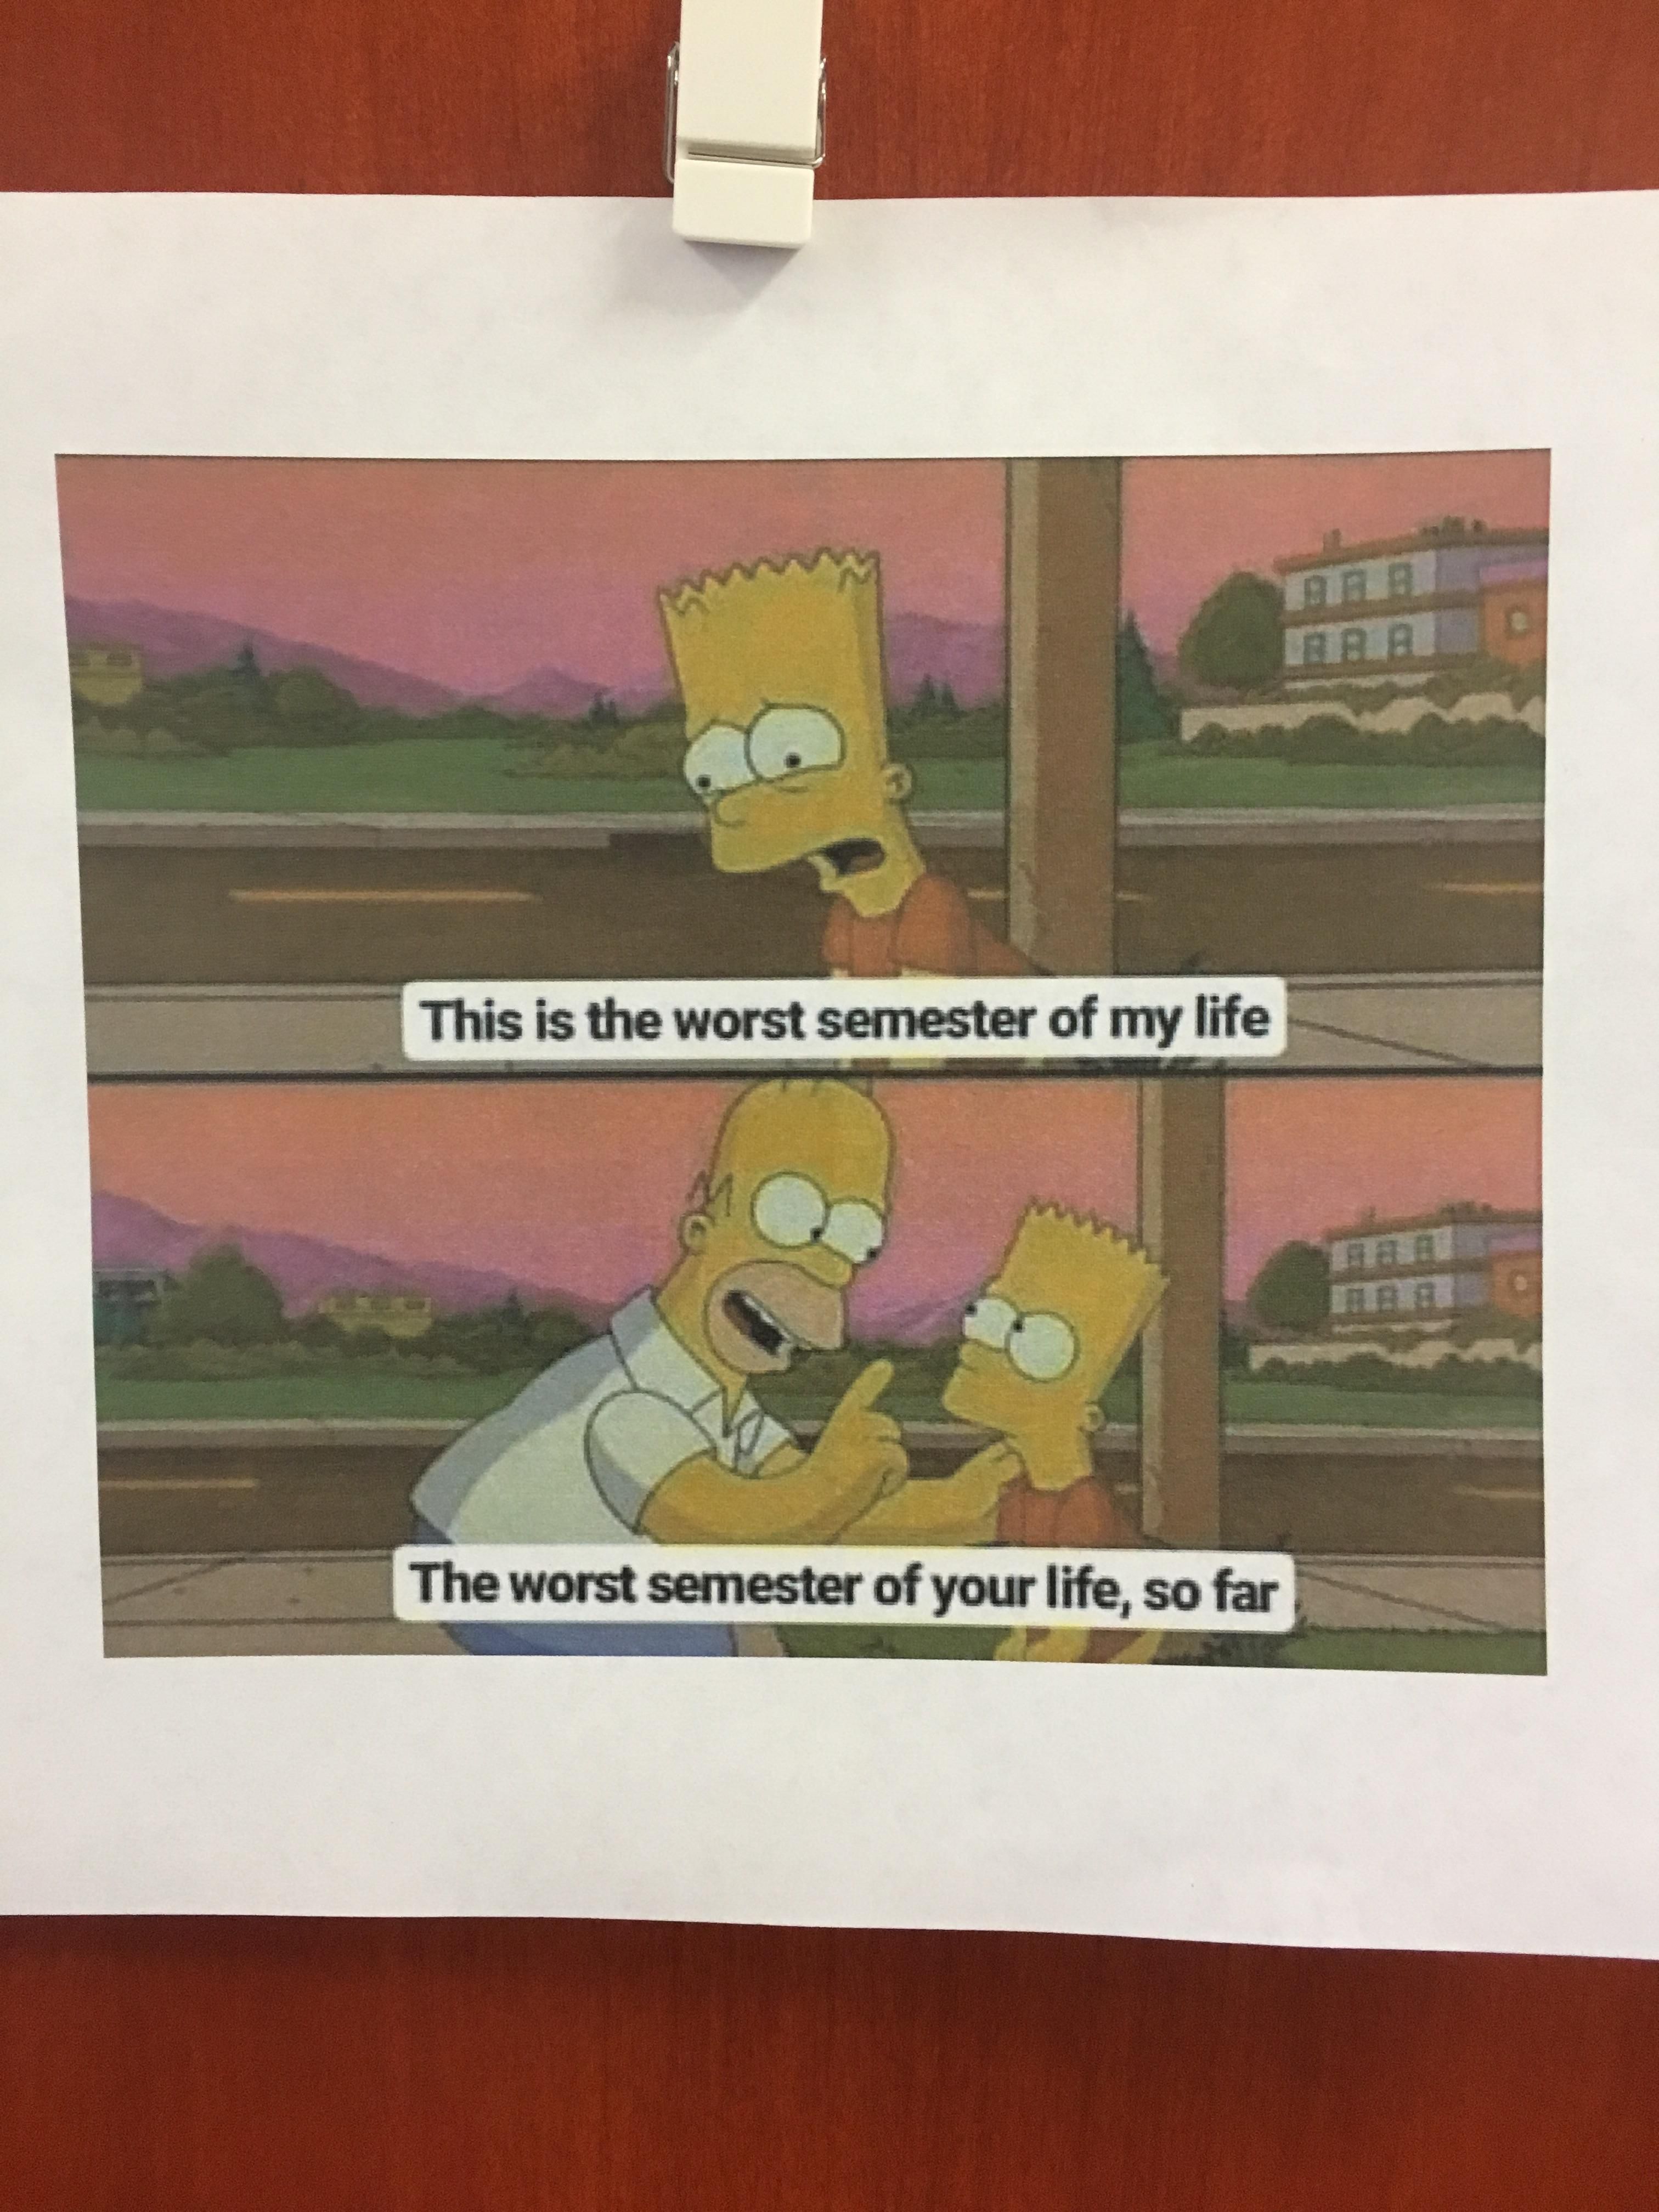 One of my med school professors printed this and put it on his door after a tough exam